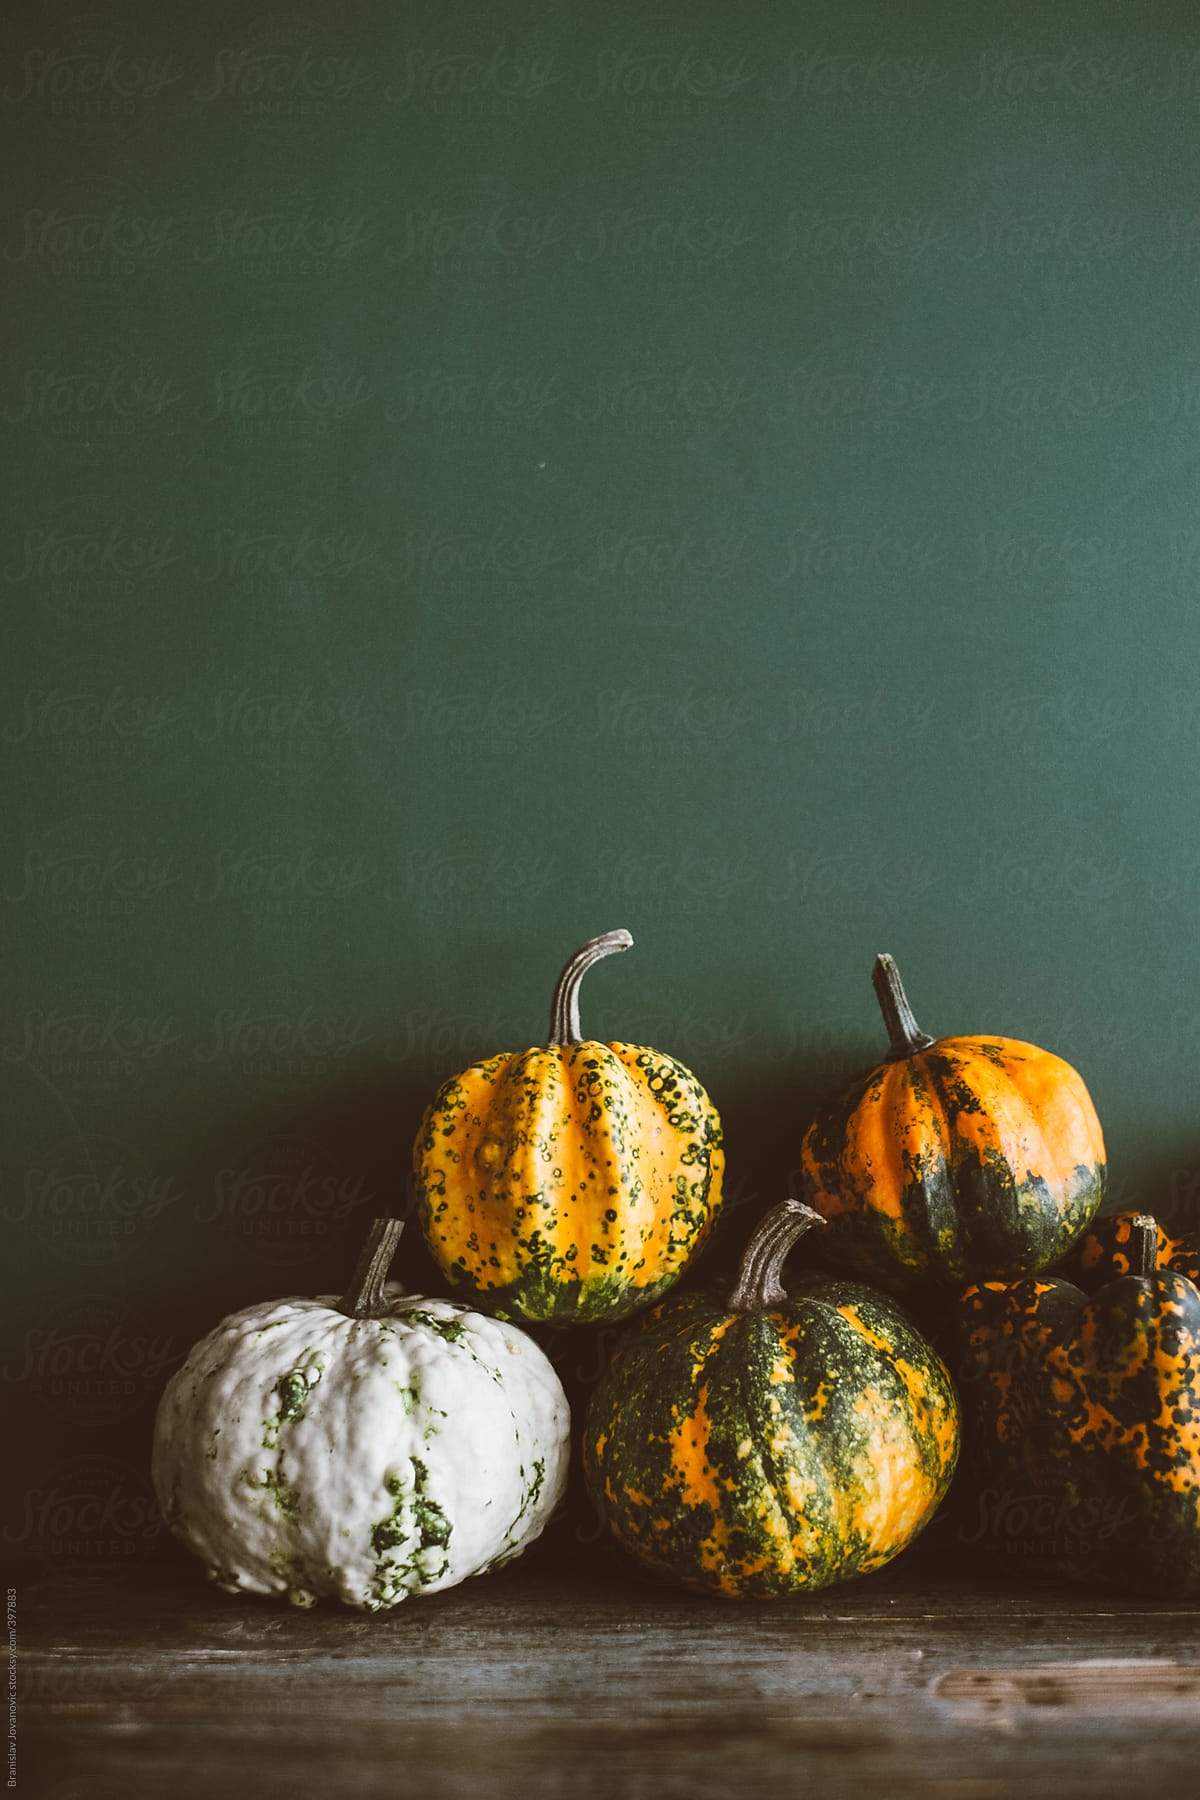 Colourful Pumpkins Stacked In Front Of The Green Chalkboard